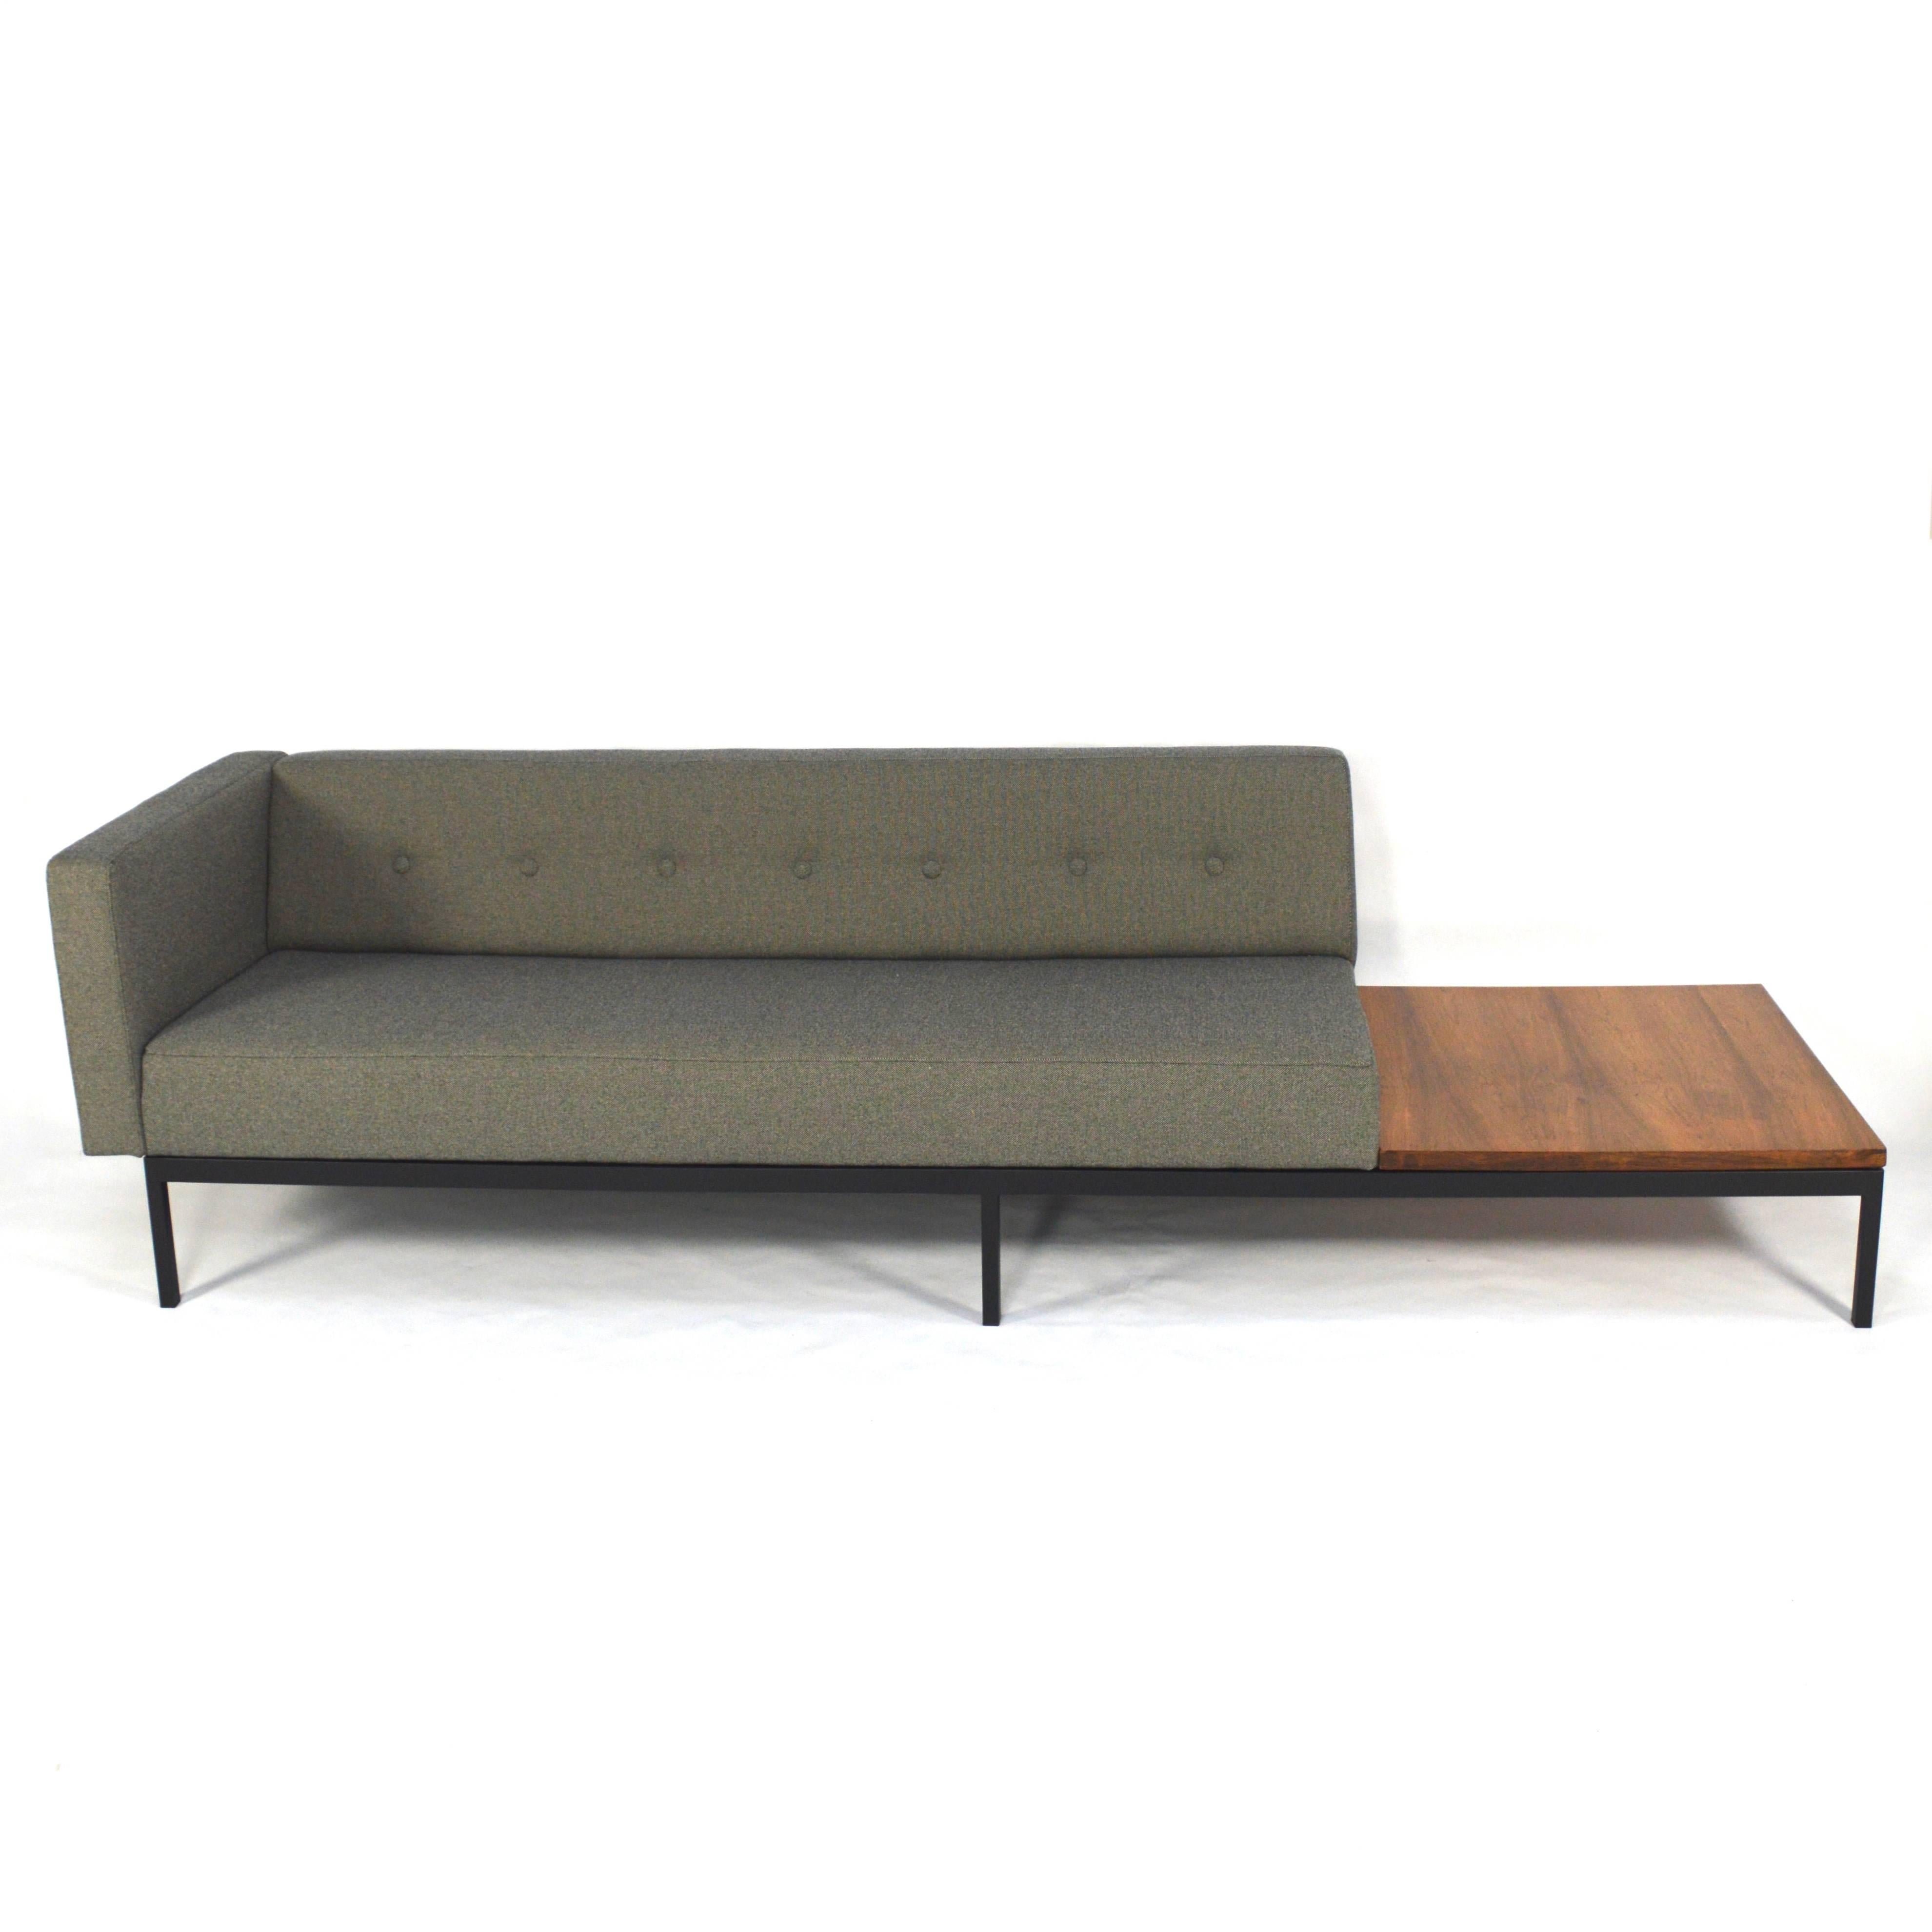 Gorgeous and timeless sofa with rosewood coffee table designed by the renowned designer Kho Liang Ie.
Completely reupholstered with new foam filling and fabric. 
The black lacquered metal base has also been restored.
The rosewood coffee table has